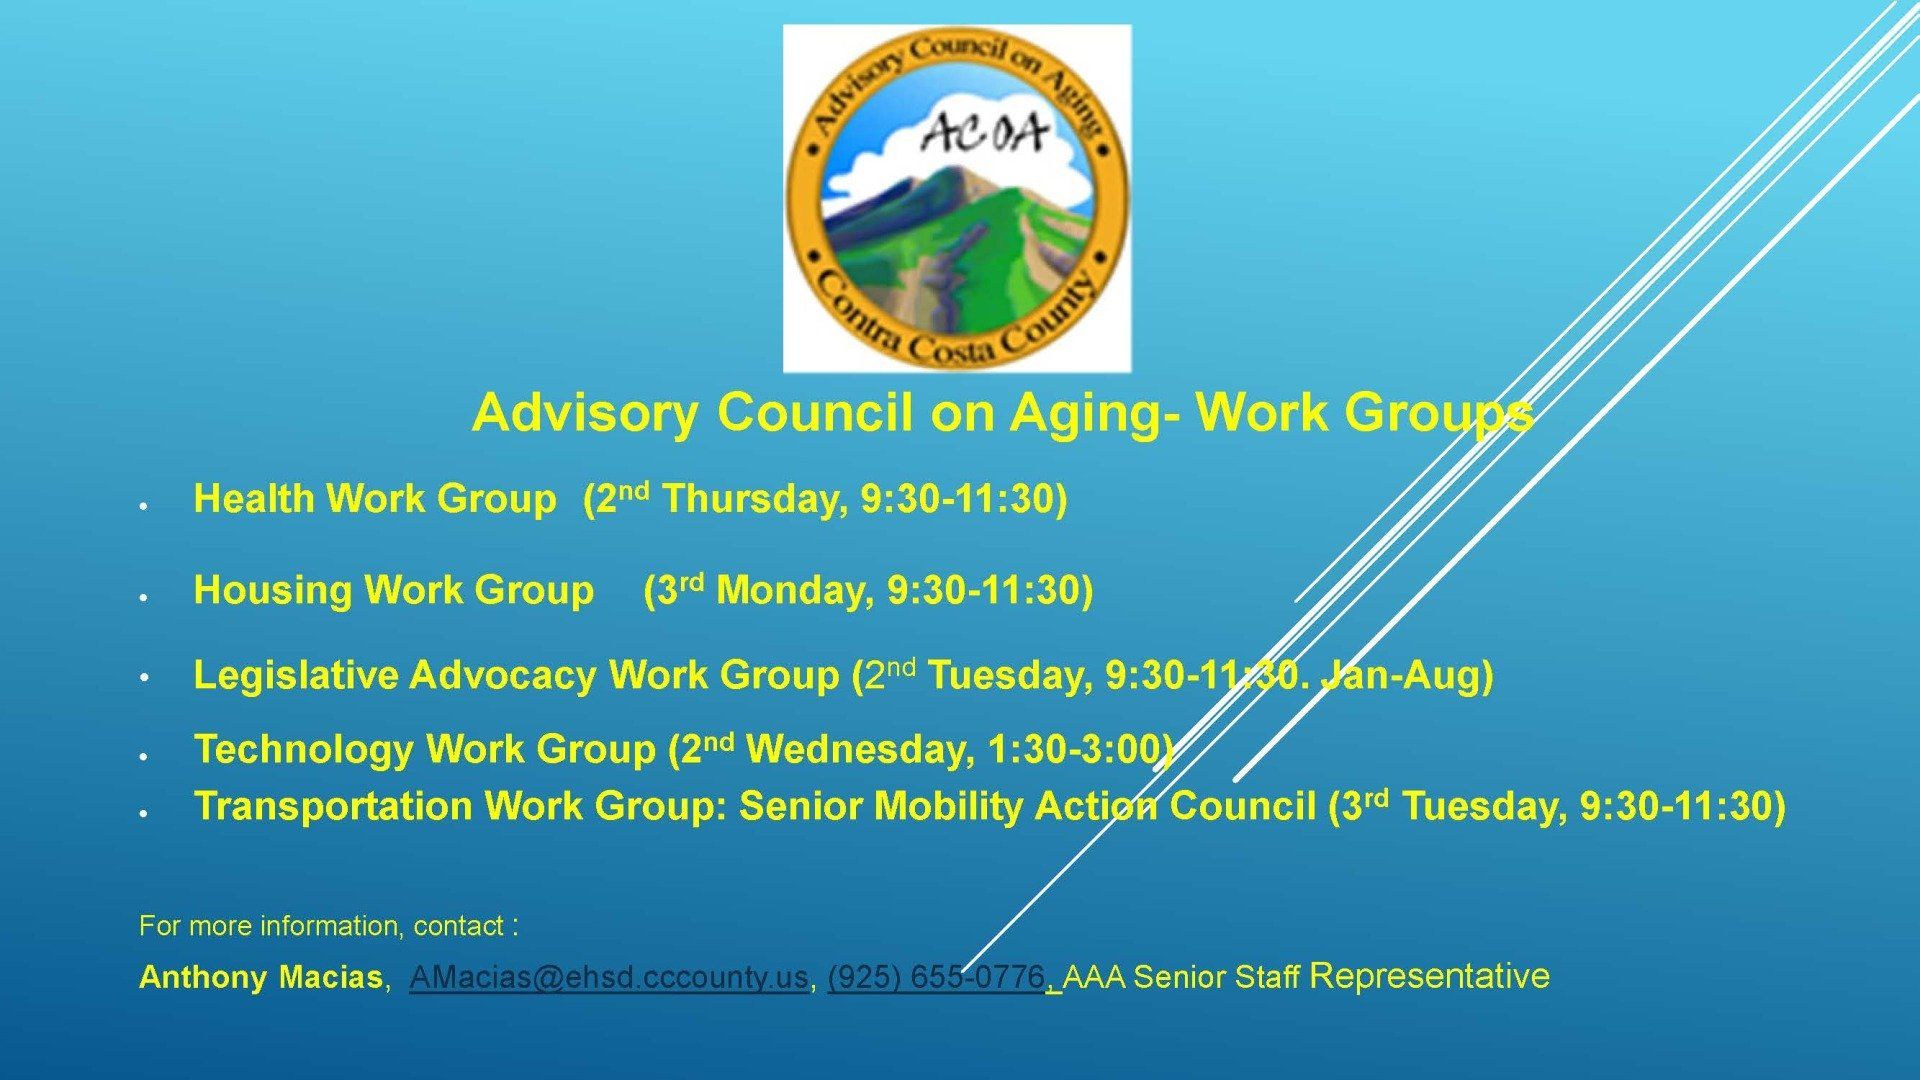 Slide 2 of the Contra Costa County Advisory Council on Aging's Presentation